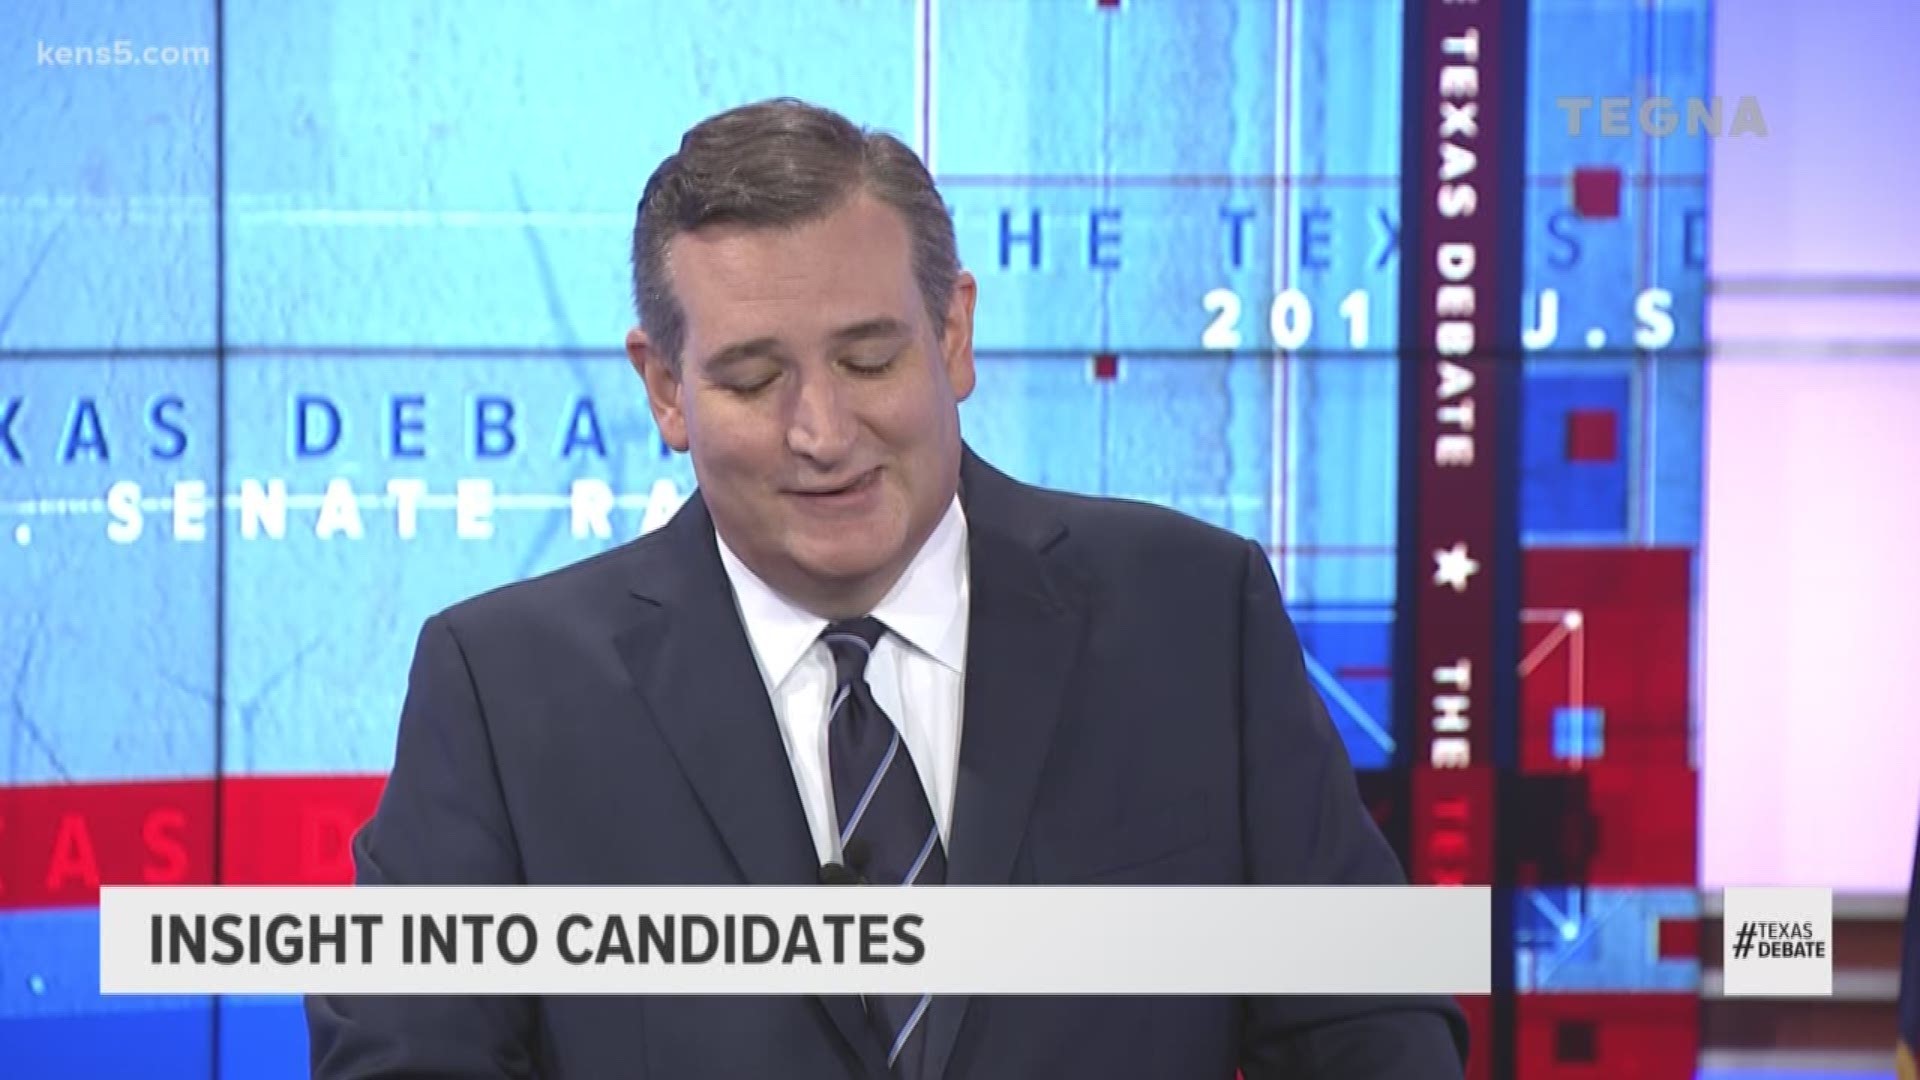 Sen. Ted Cruz says that it's tough spending so much time away from his family while working in Washington.